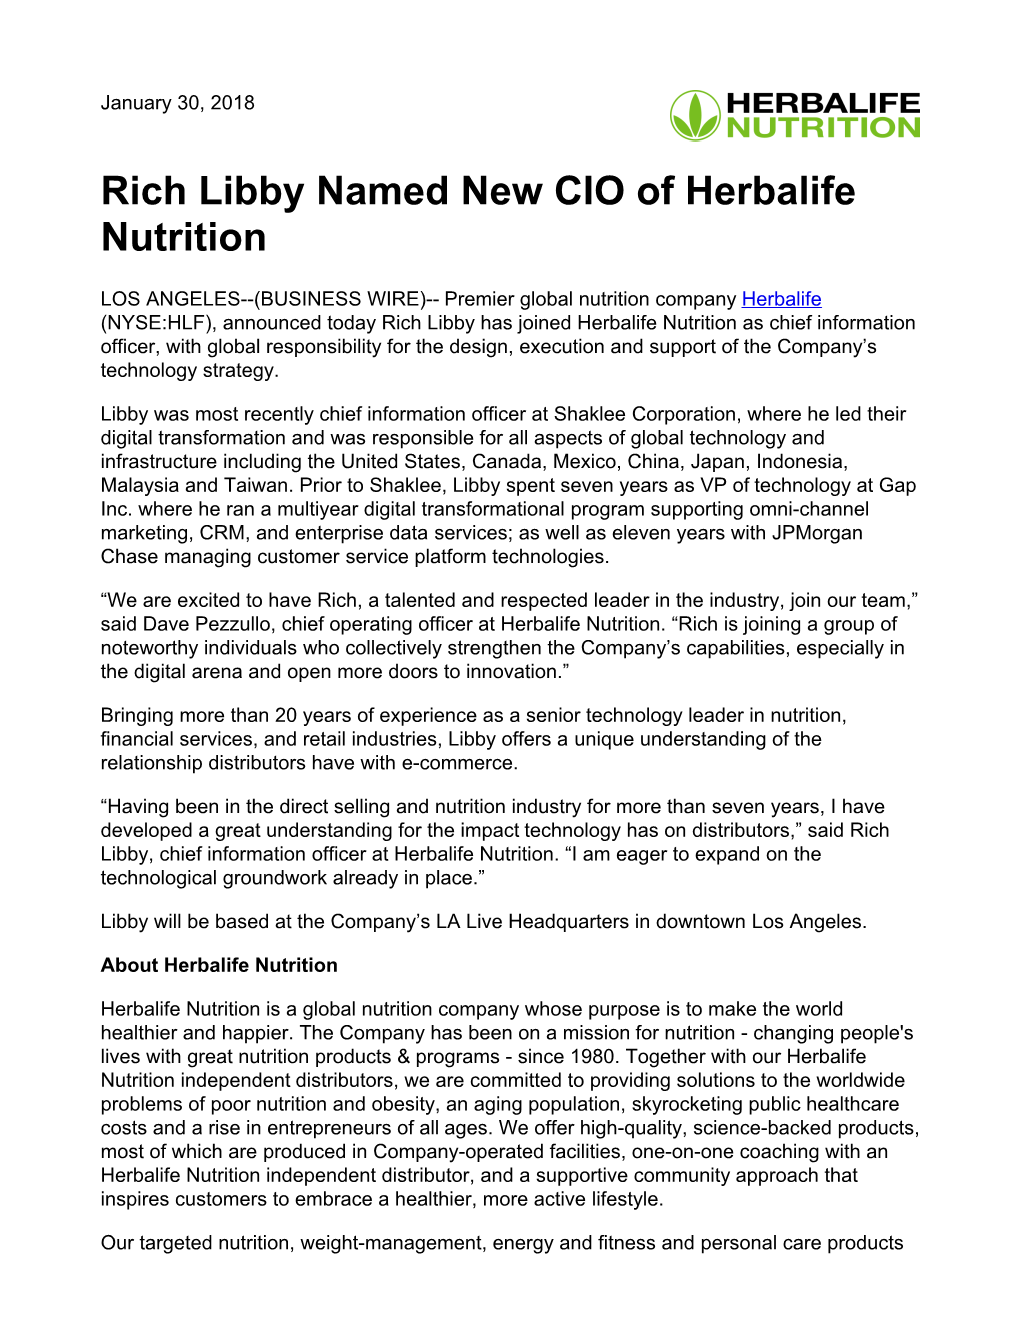 Rich Libby Named New CIO of Herbalife Nutrition